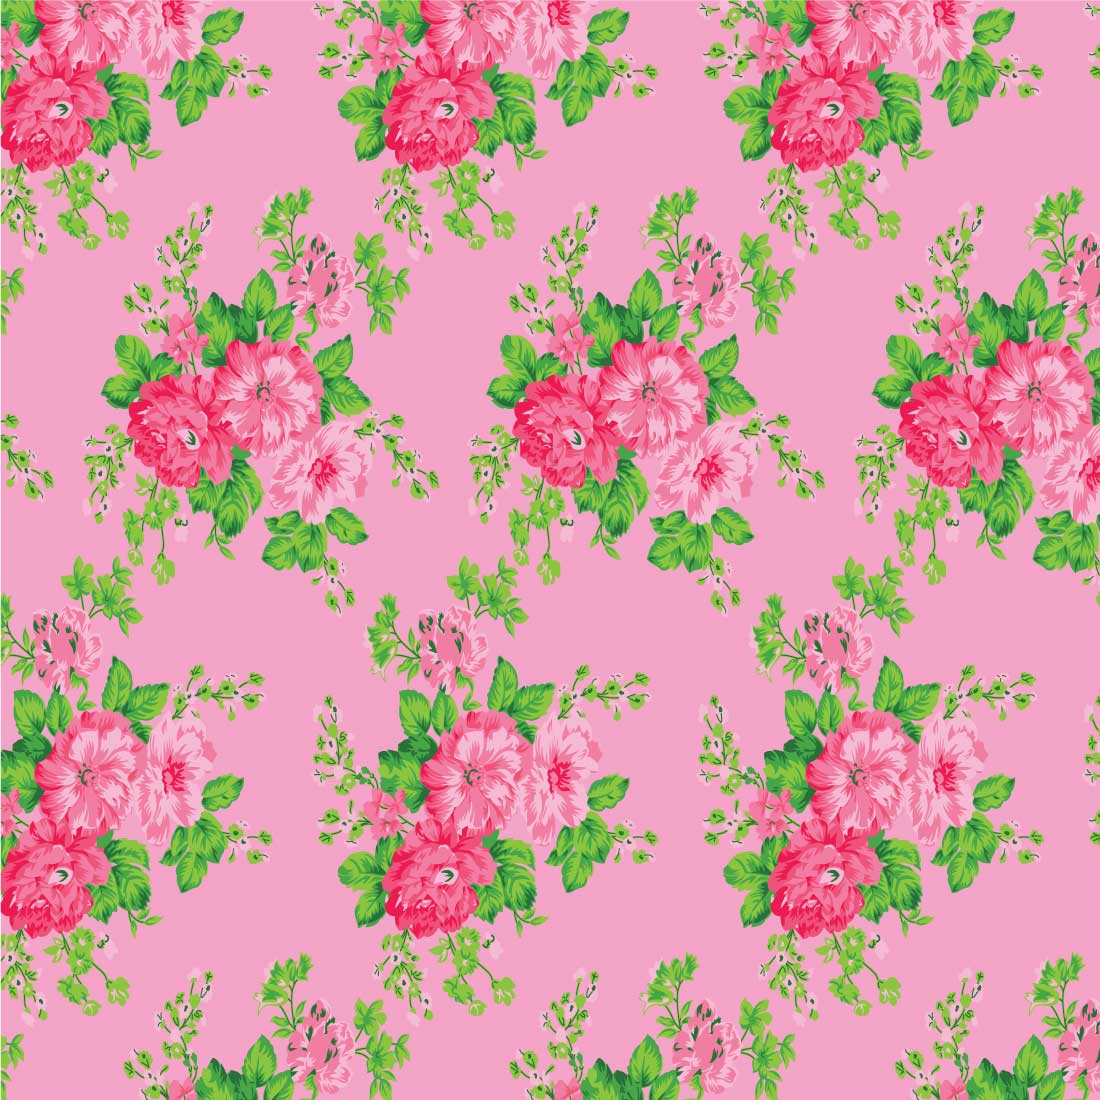 Pink background with pink flowers and green leaves.